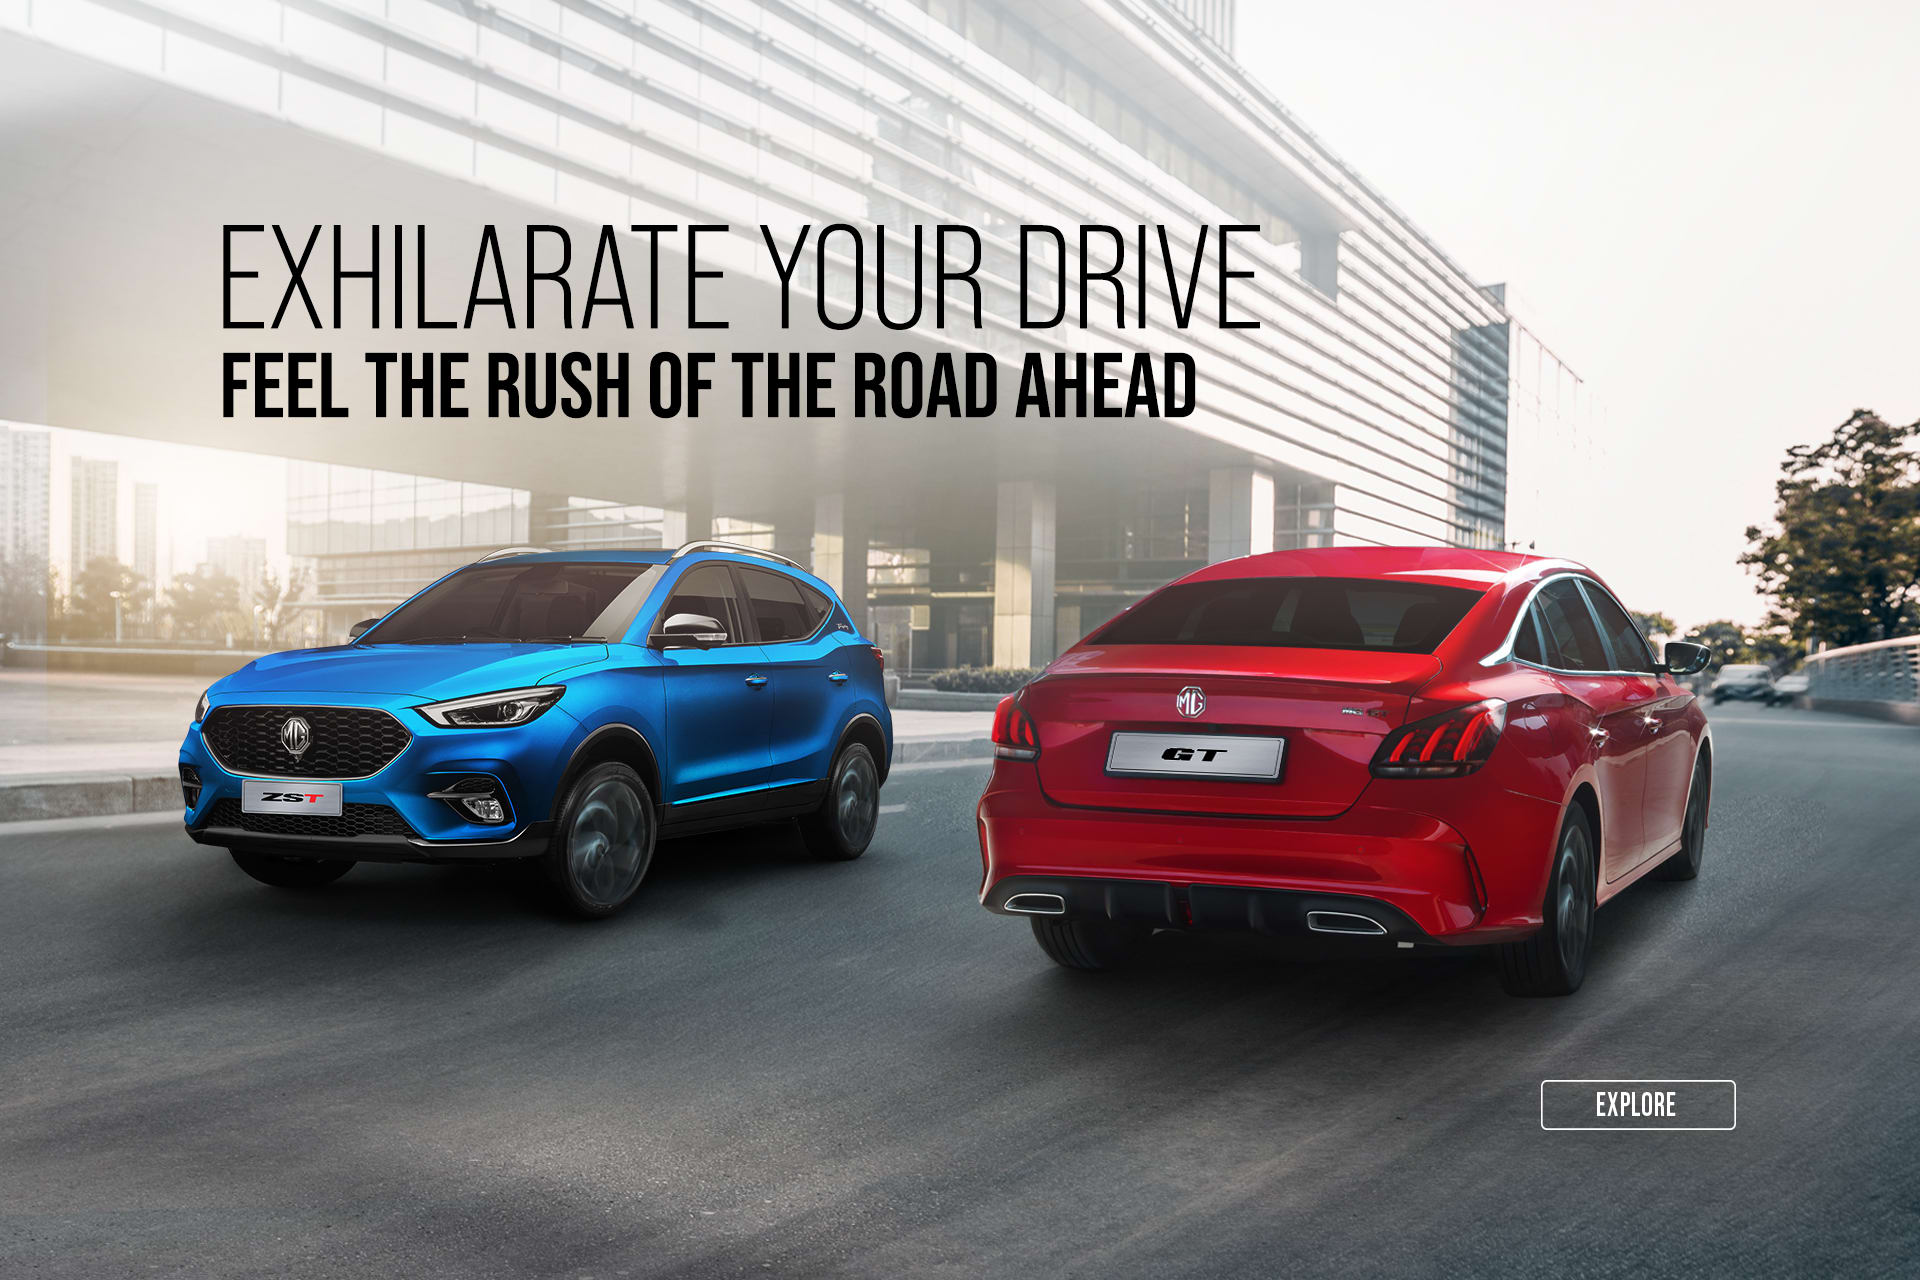 EXHILARATE YOUR DRIVE